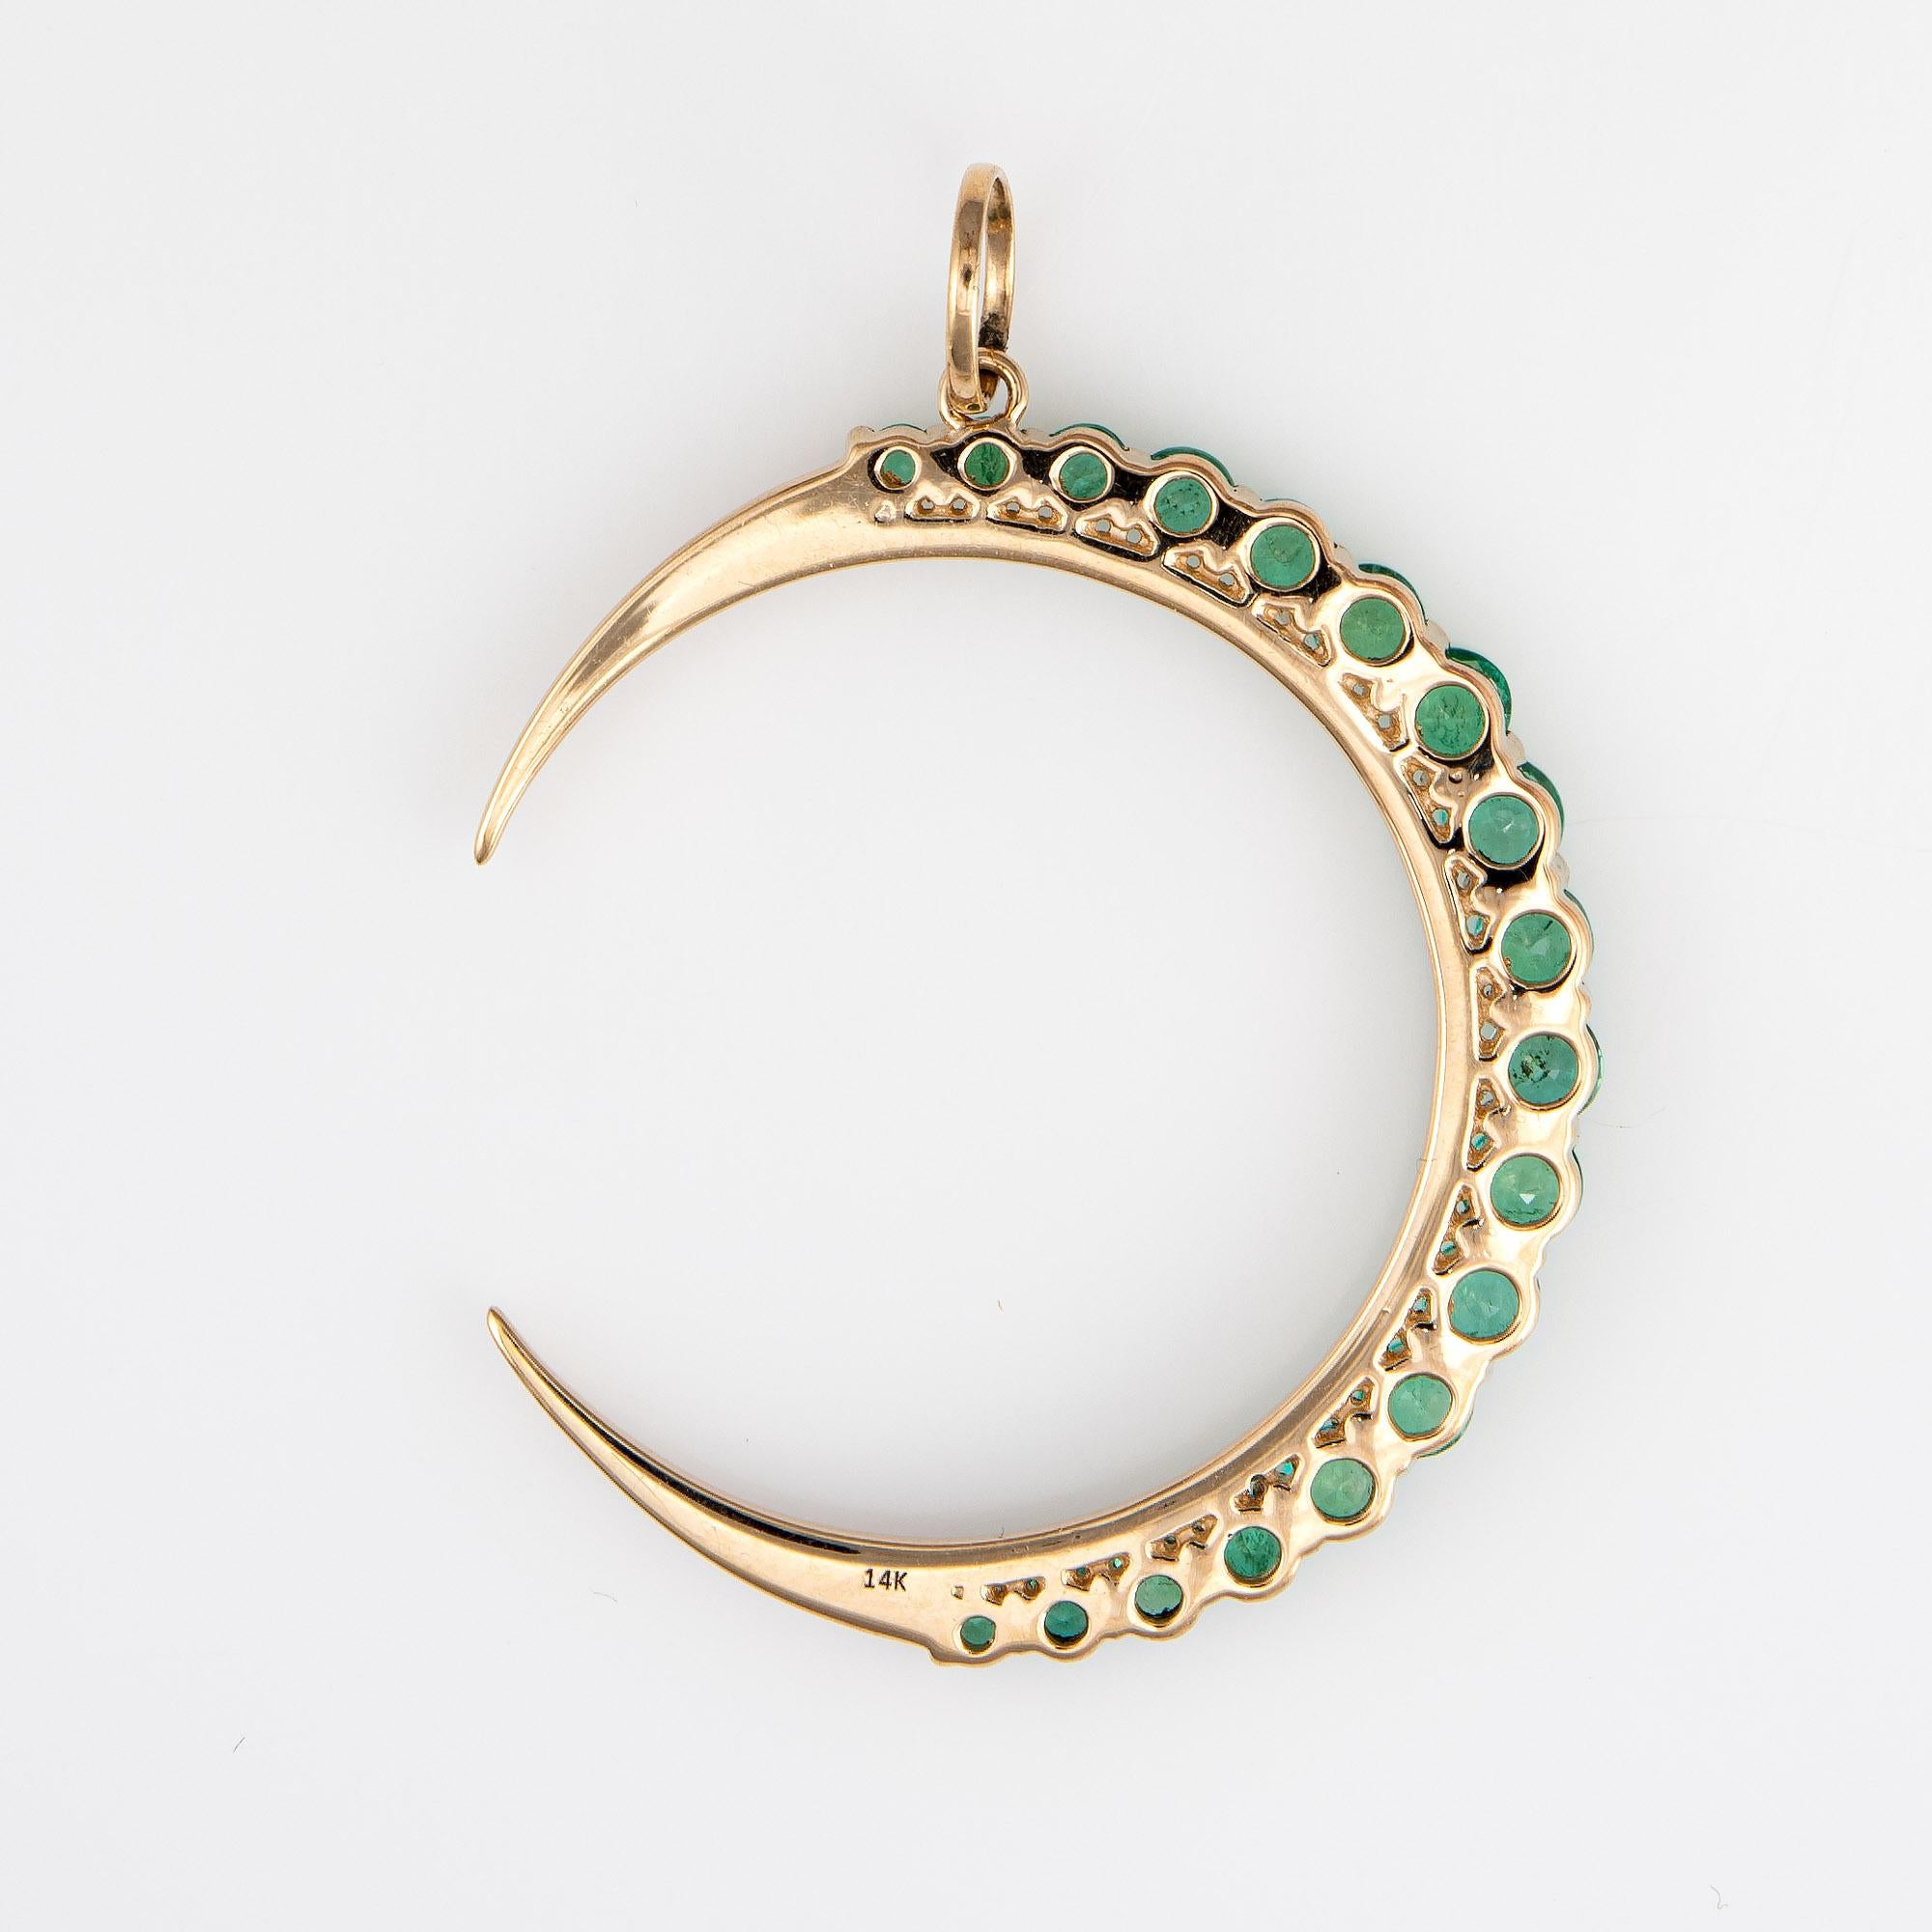 Finely detailed emerald & diamond crescent moon pendant crafted in 14 karat yellow gold. 

Diamonds total an estimated 0.39 carats (estimated at H-I color and VS2-SI2 clarity). The emeralds total an estimated 1.38 carats. The emeralds are in very